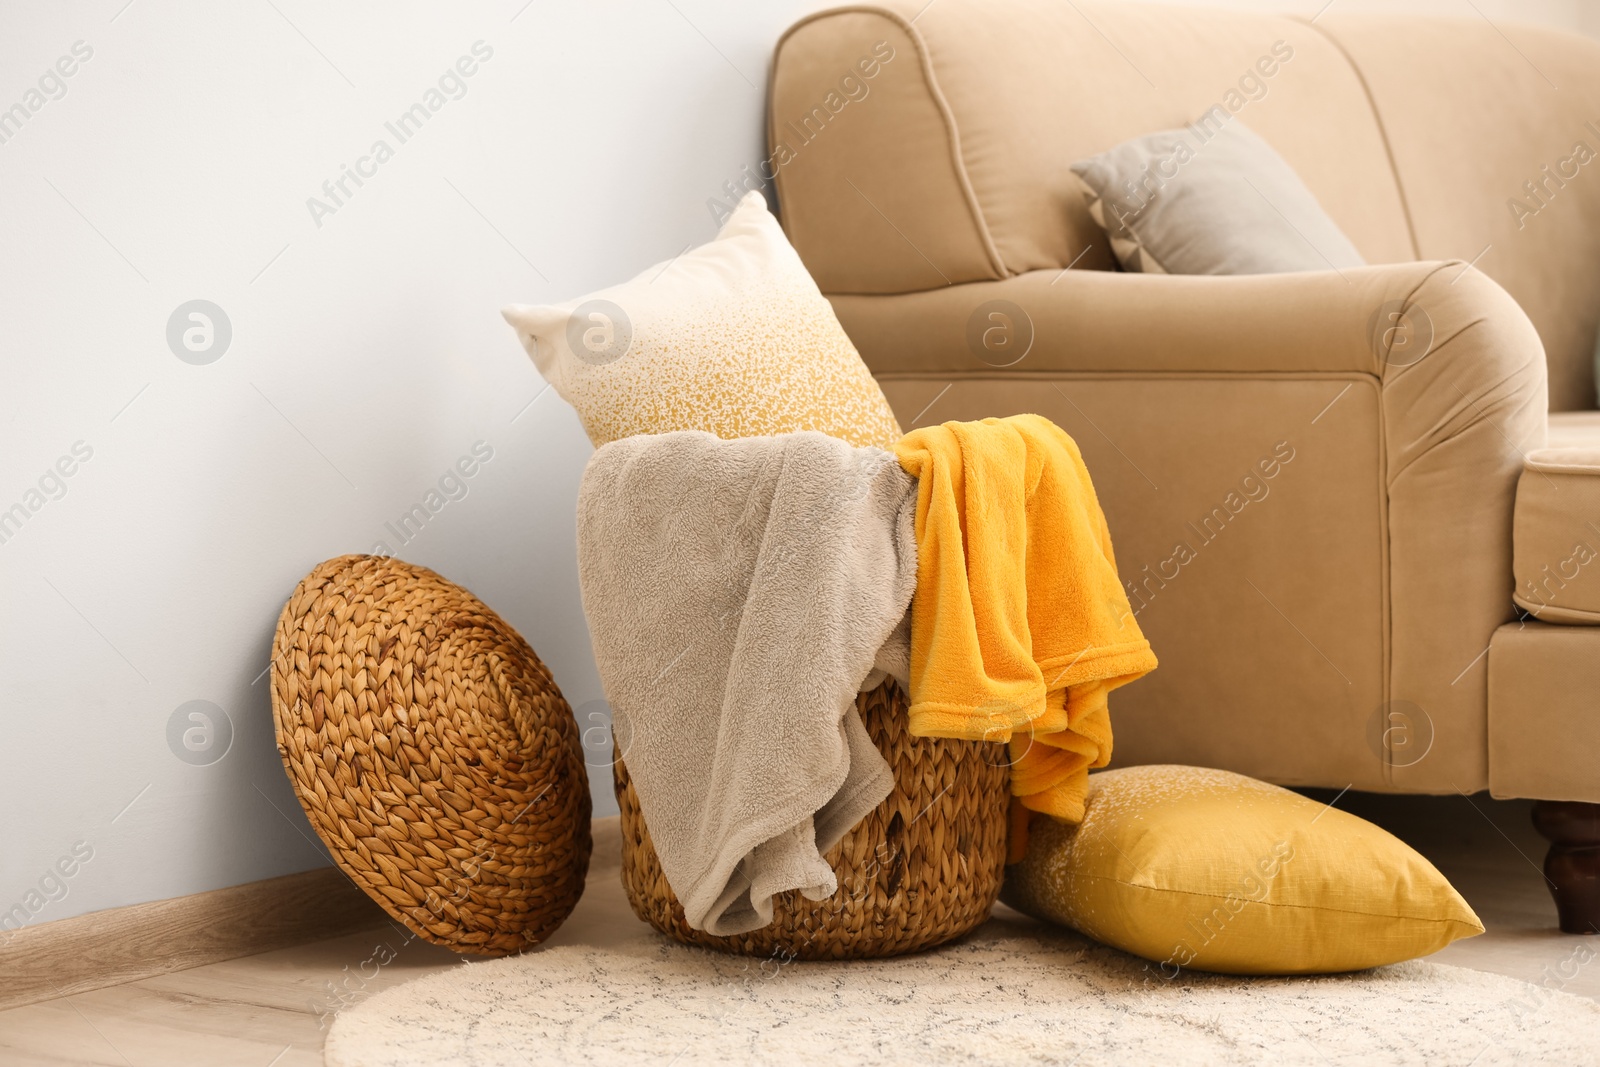 Photo of Wicker basket with color blankets and pillows near beige sofa, space for text. Idea for interior design